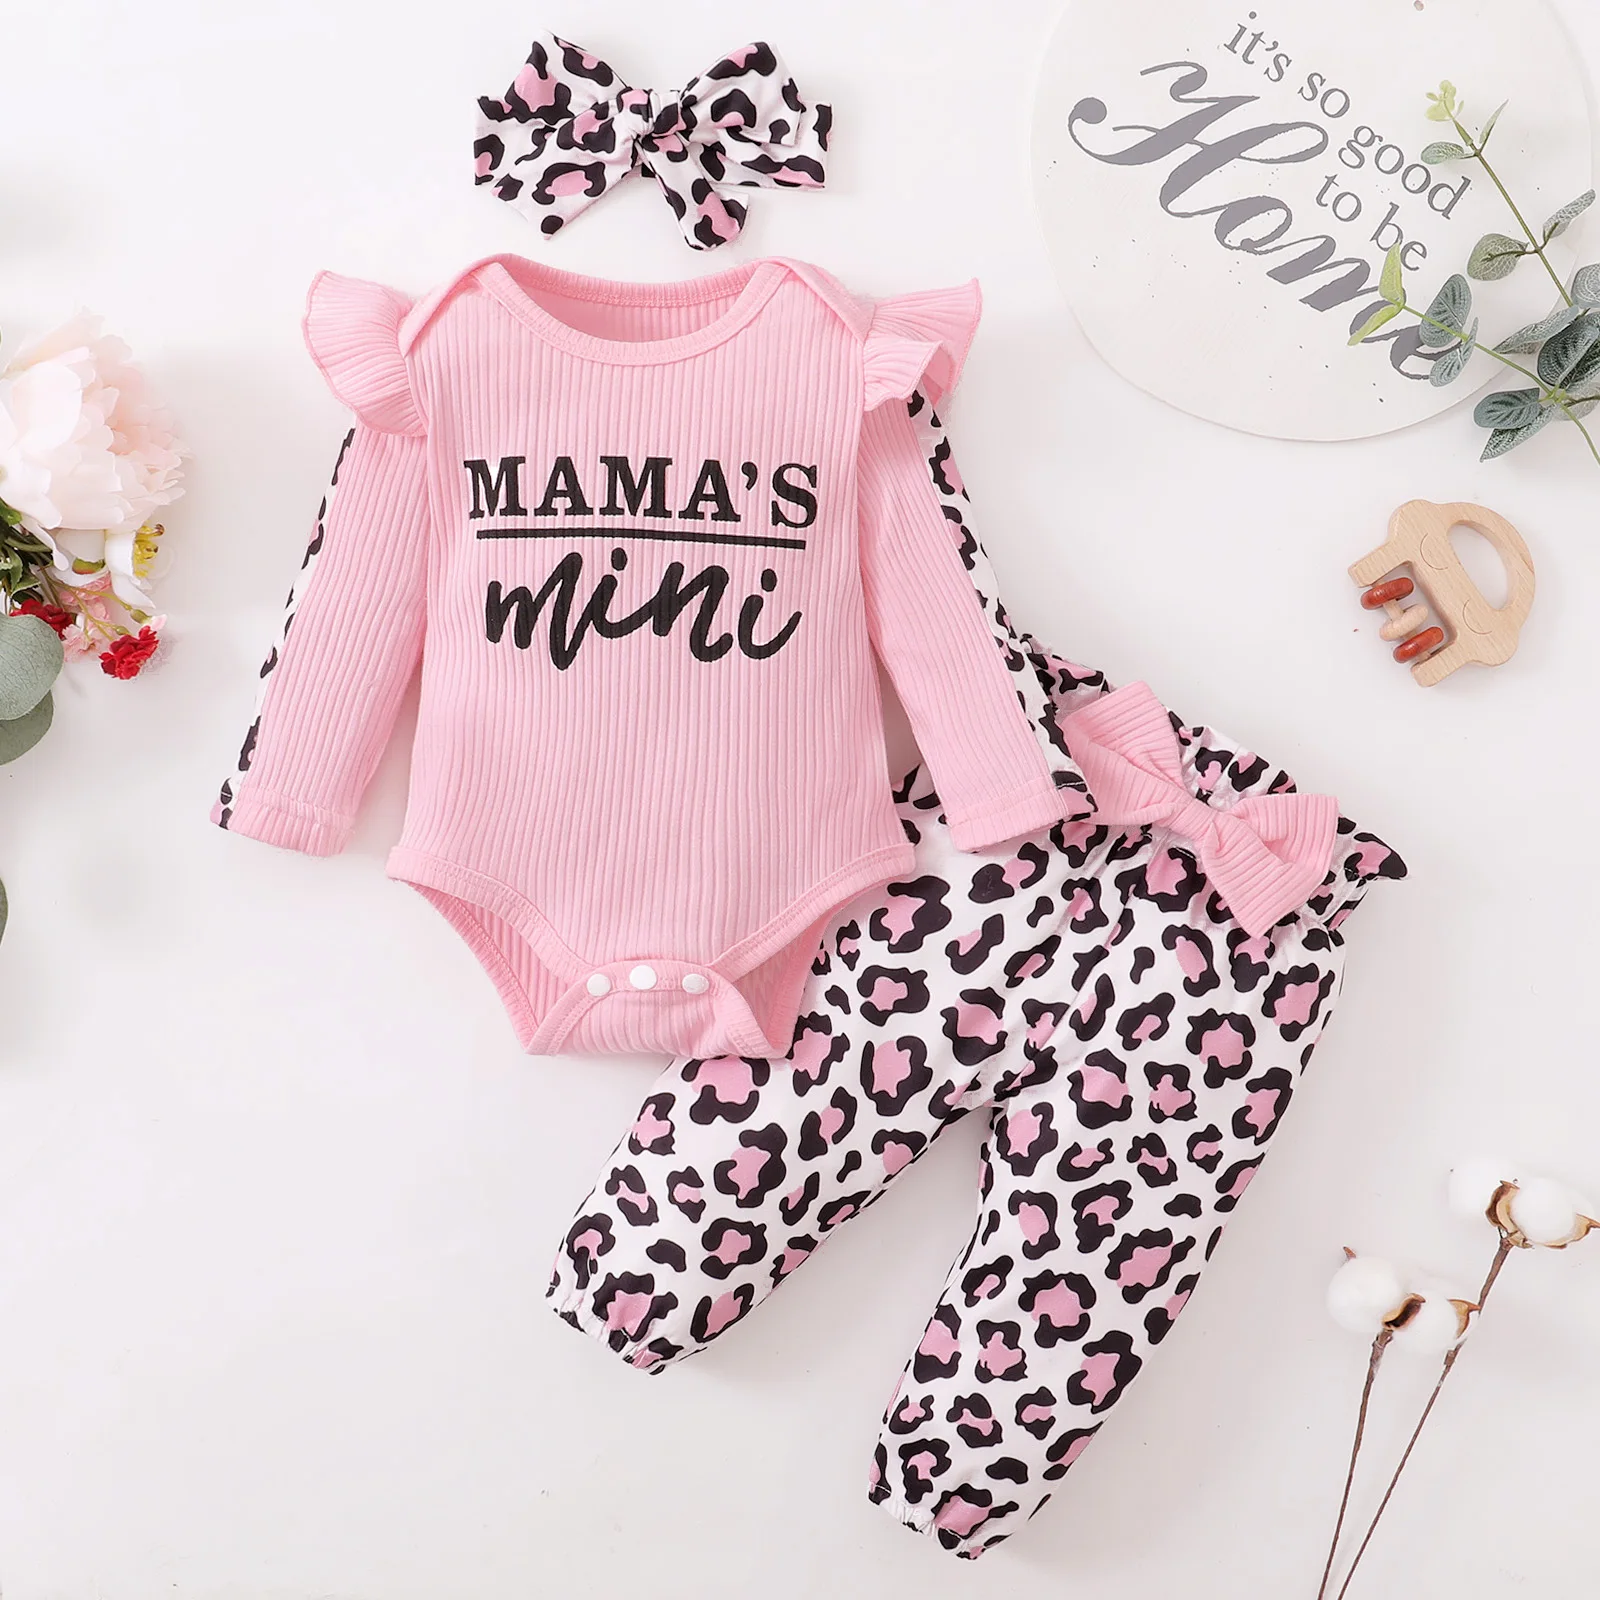 3Pcs Newborn Clothes Baby Girl Clothes Sets Infant Outfit Ruffles Romper Top Bow Leopard Pants New Born Toddler Clothing